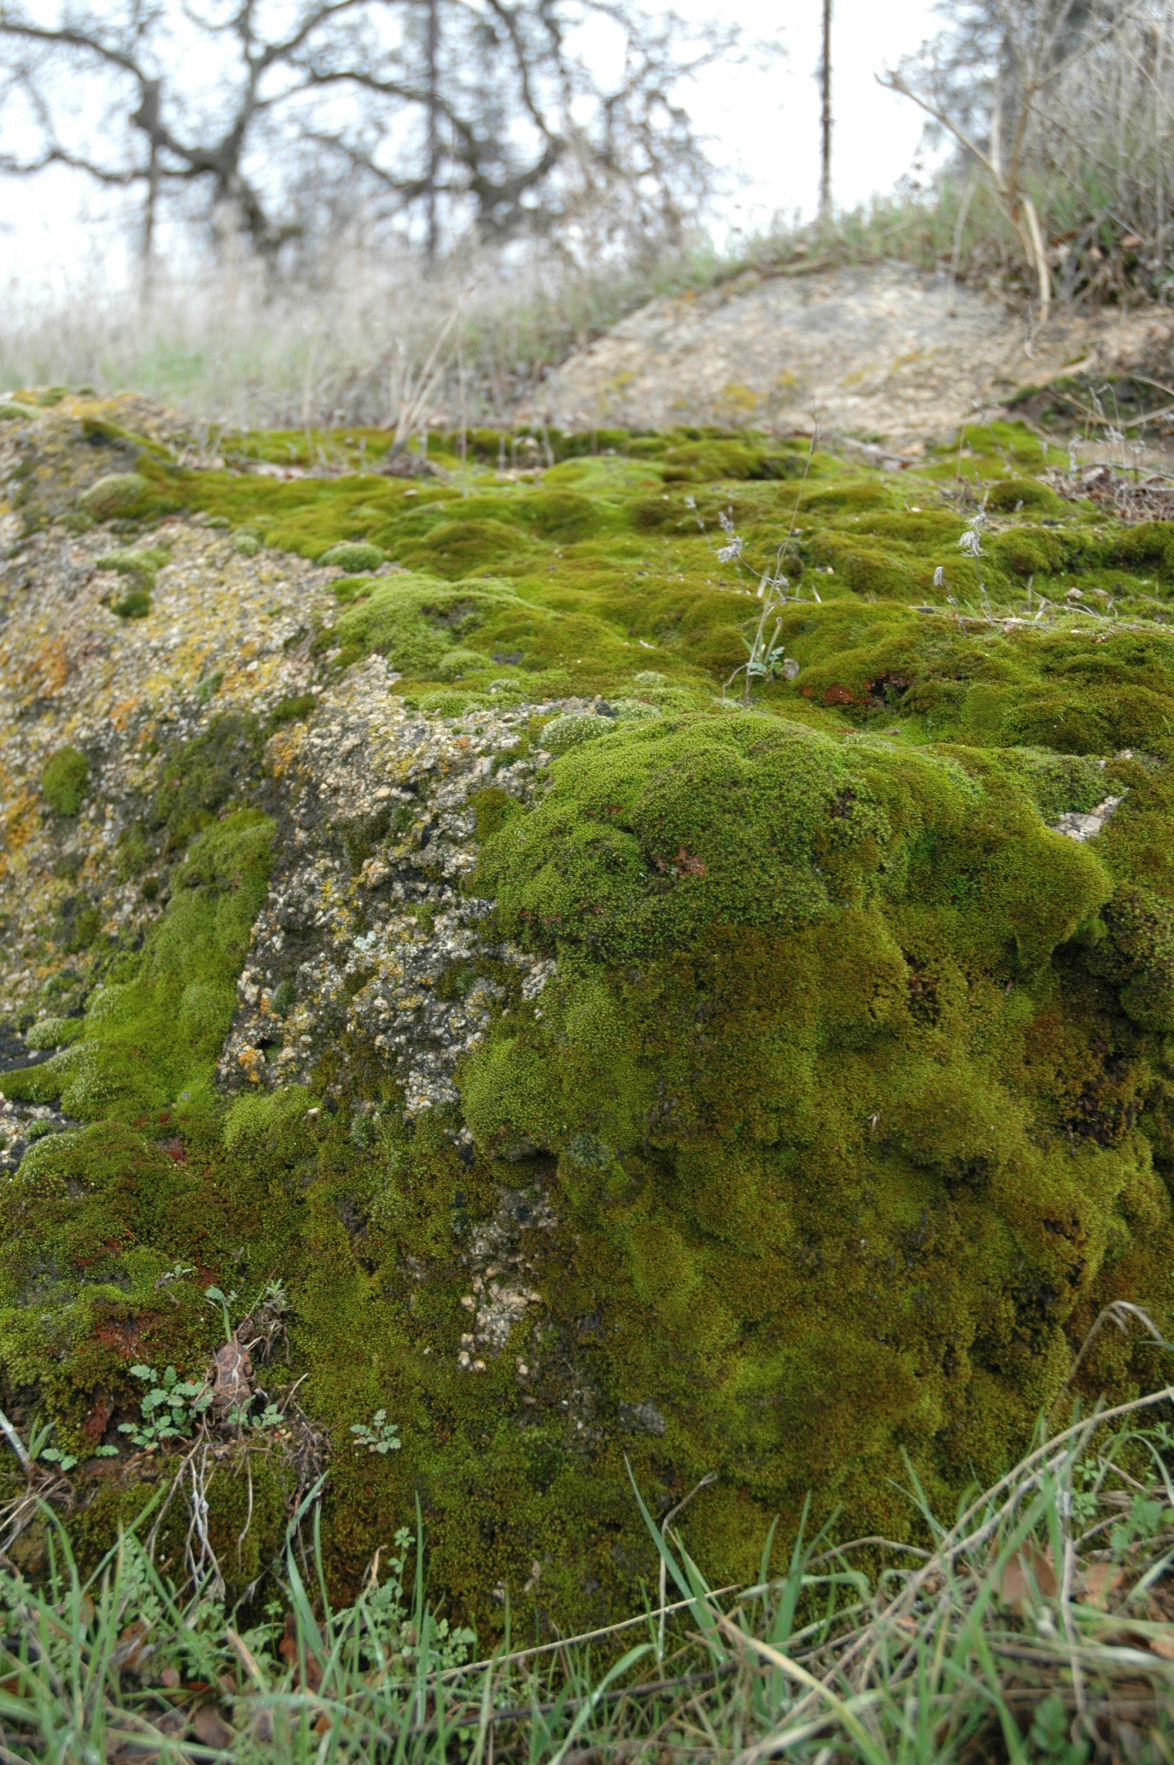 Pen in Hand: Rain turns moss into a lush green carpet covering rocks ...